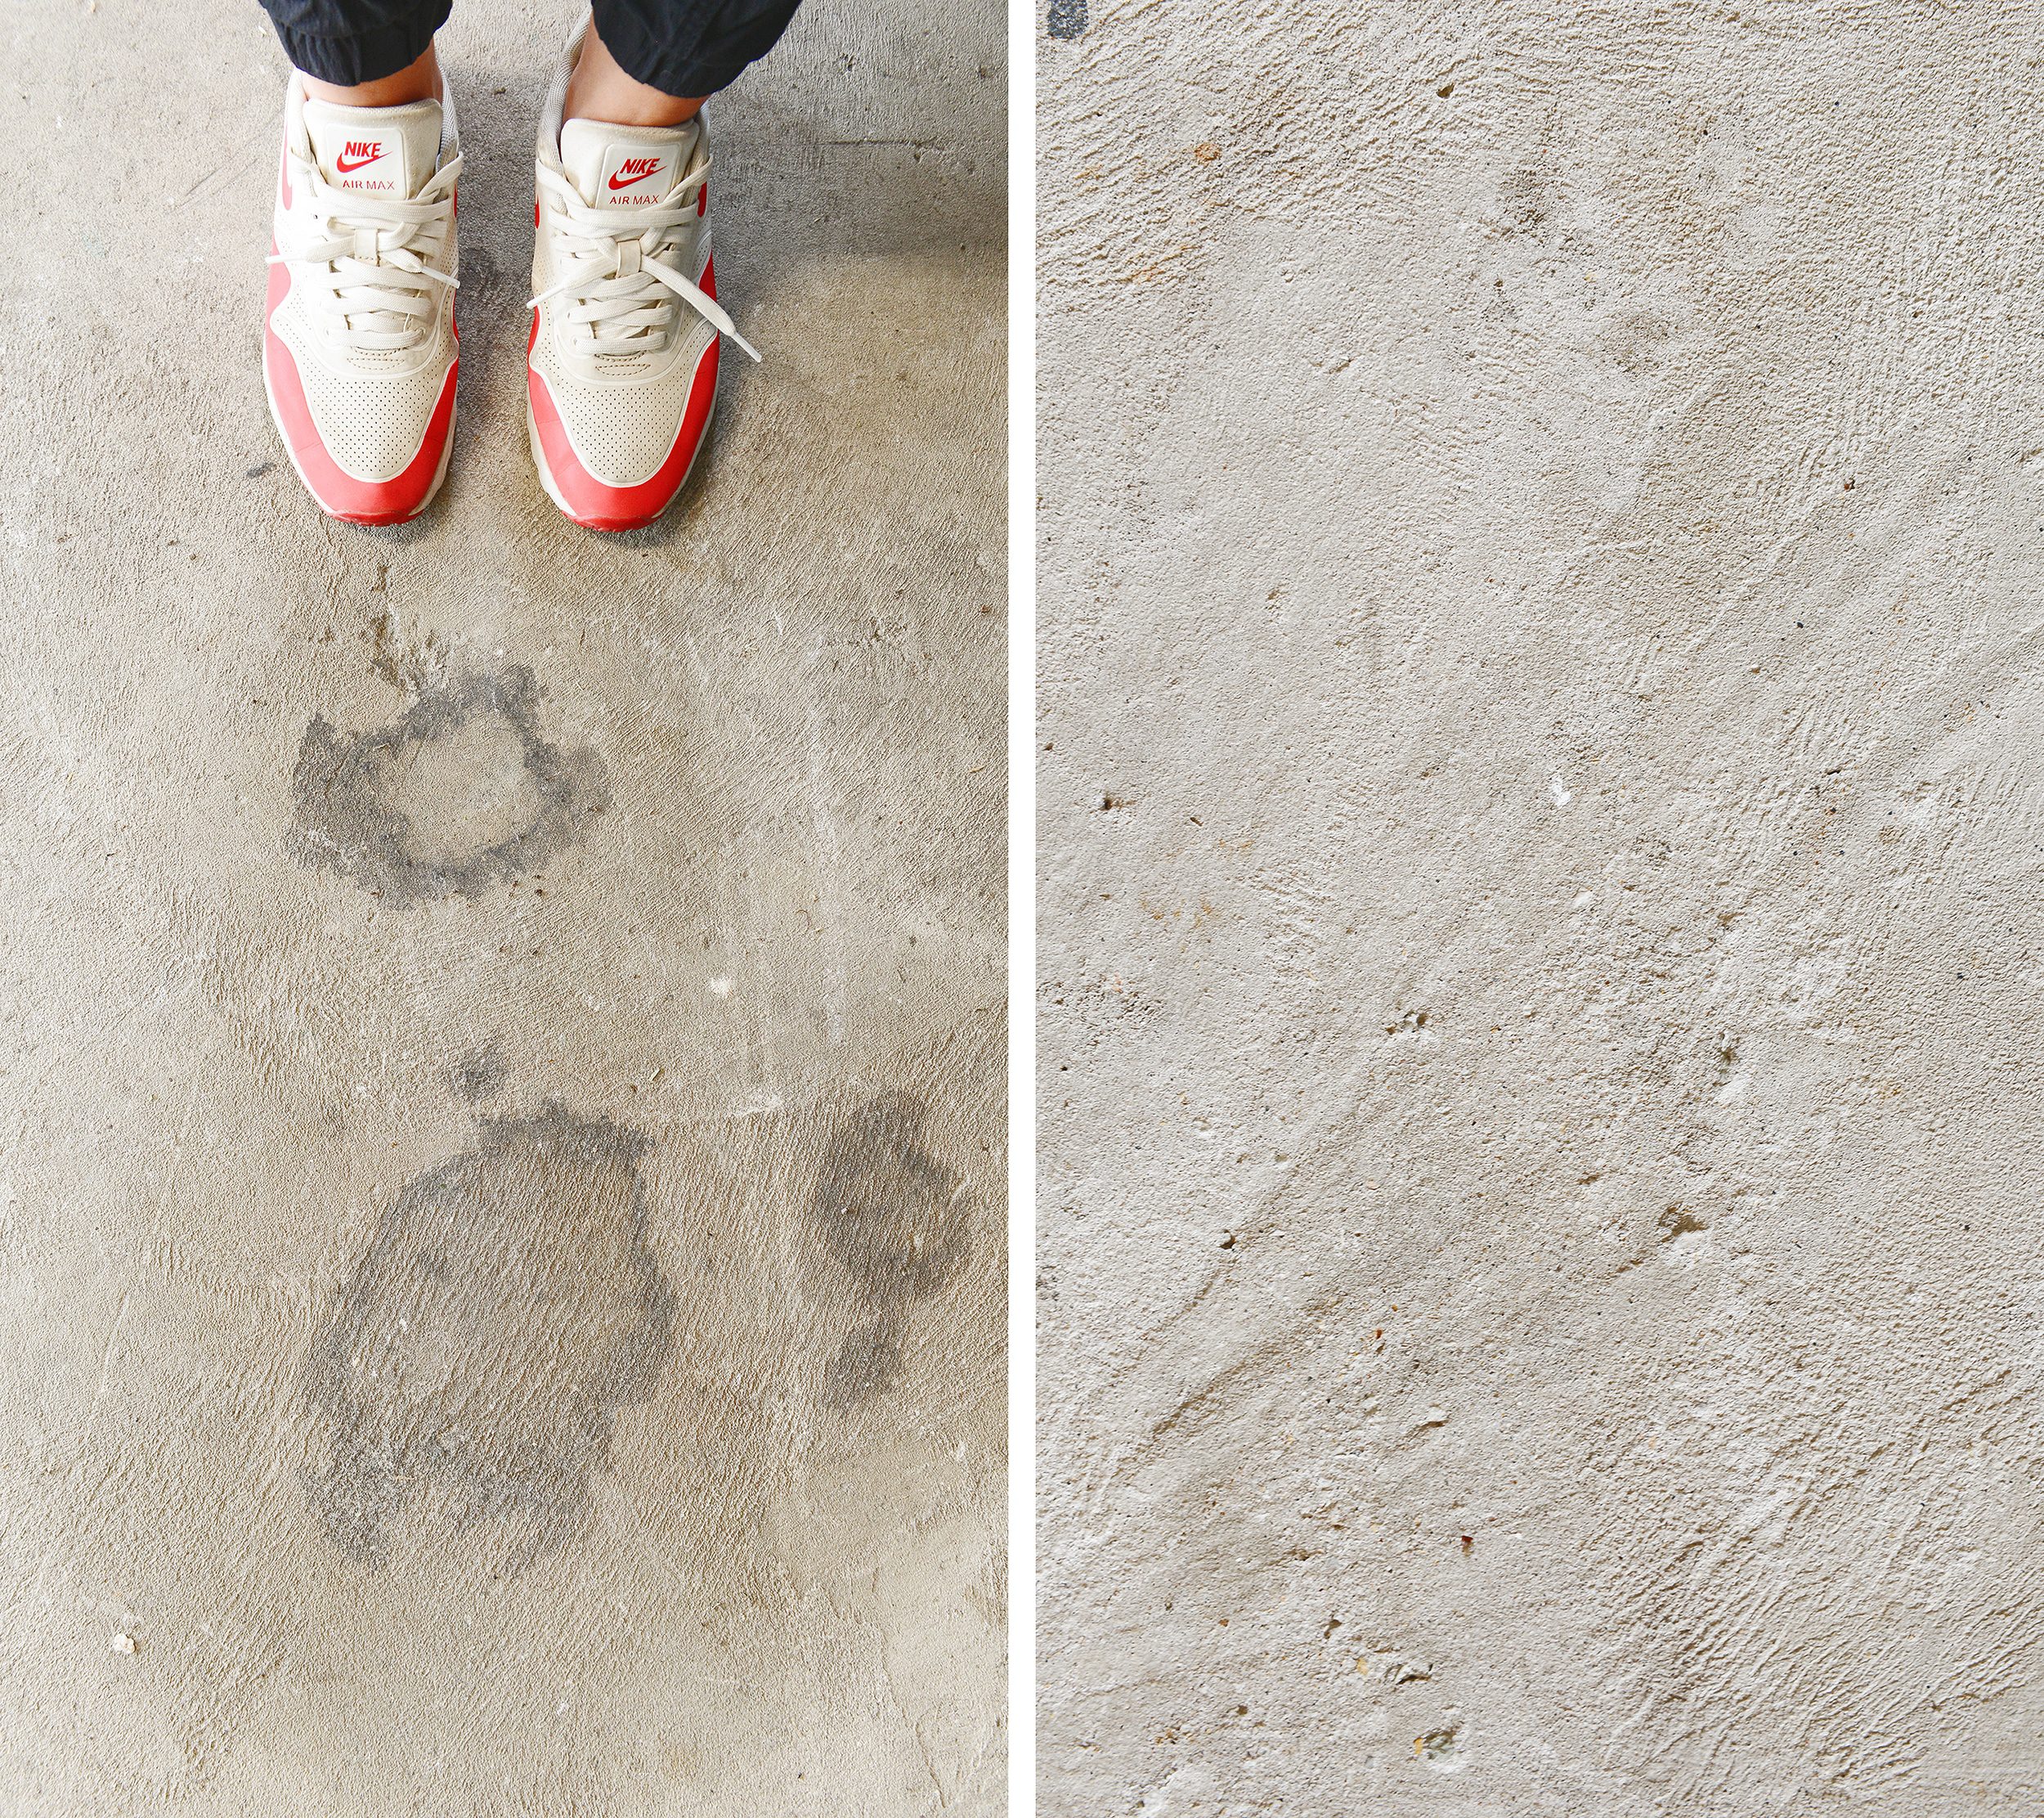 The power of pressure washing with the help of Zep! // Zep Driveway & Concrete Pressure Wash + Zep House & Siding Pressure Wash // via Yellow Brick Home #ZepLevelClean